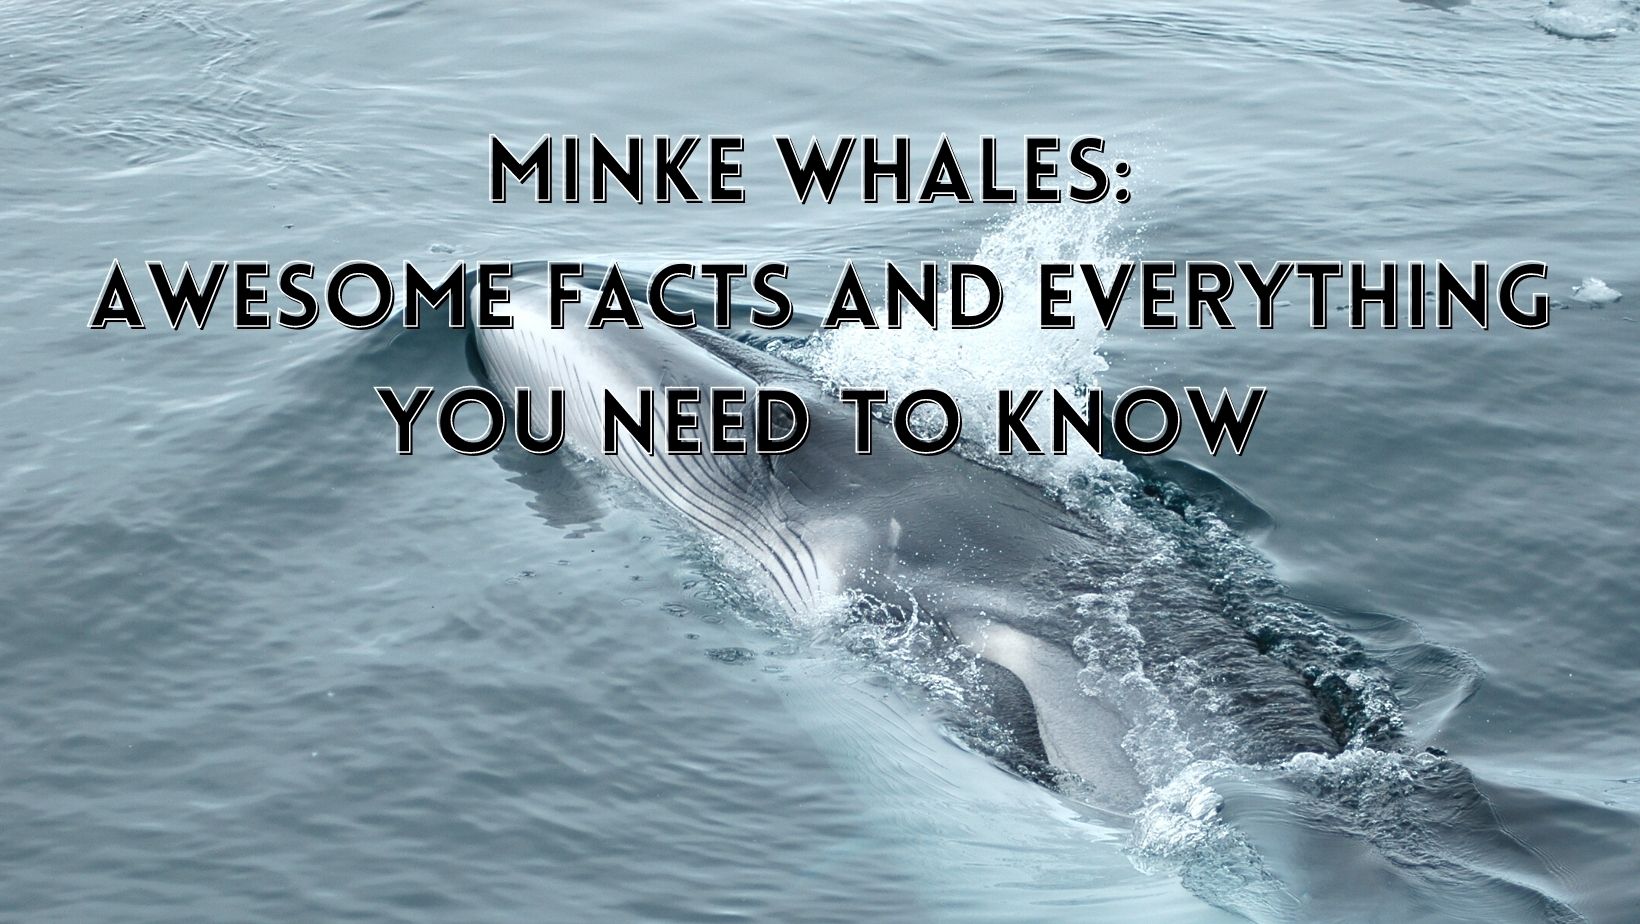 Facts about minke whales